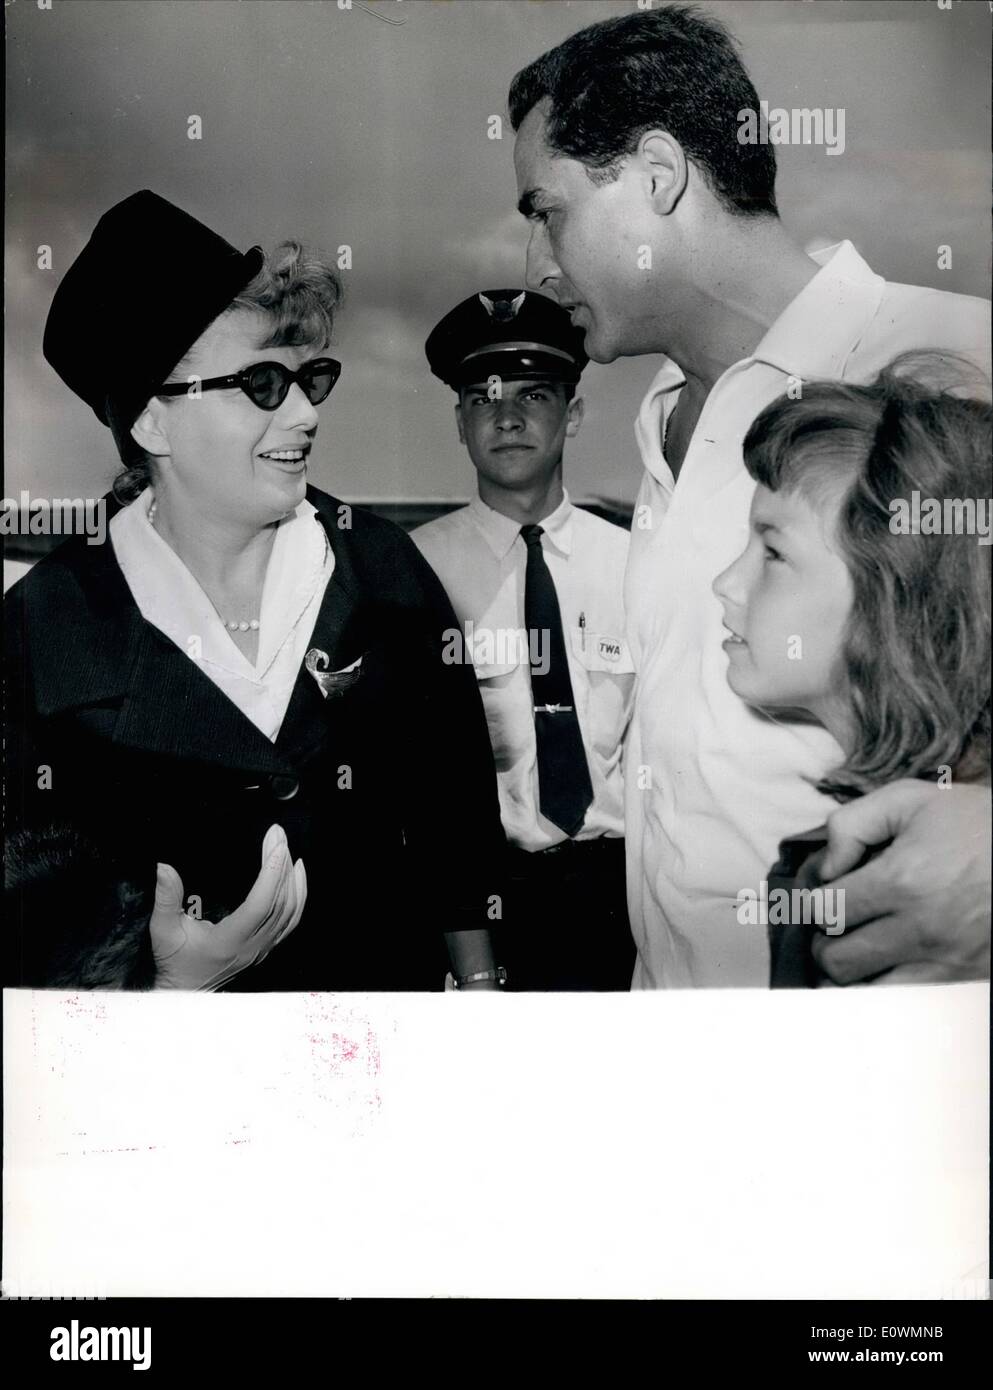 Aug. 08, 1963 - Rome, 5th august 1963- American actress Shelley Withes arrived this morning to Rome from USA She will star opposite cloudin cordinele in the film ''Gil indifferent i'' Shelley Winters was accompanied by Vittaris the daughter she had from Vittorio German marriage and they were welcomed by Vittorio German and his daughter Paola, The two sisters met each other for the first time. Stock Photo